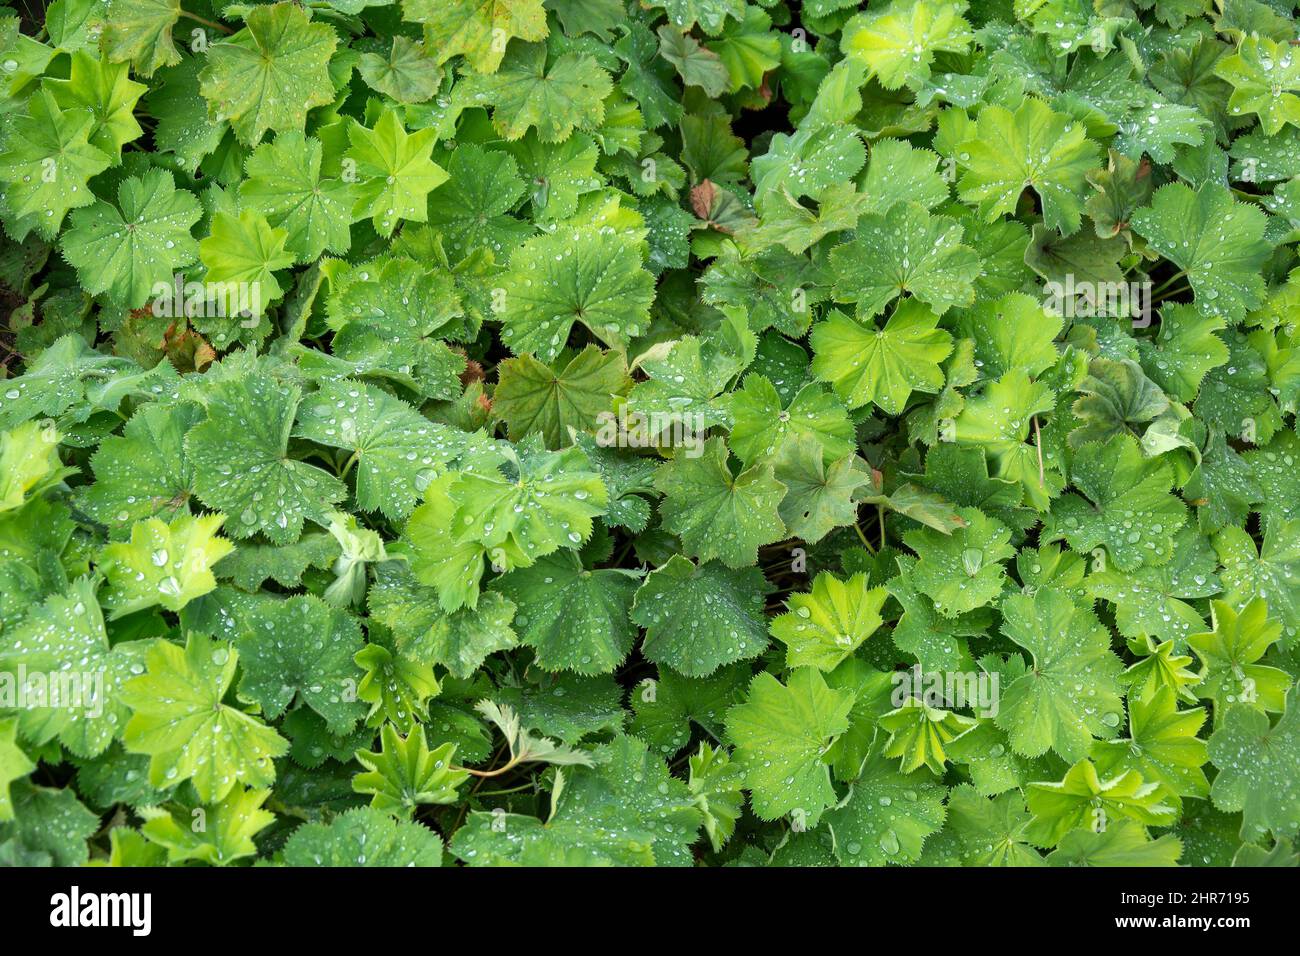 Dense carpet of young green leaves manjetka, alchemilla vulgaris, after watering Stock Photo